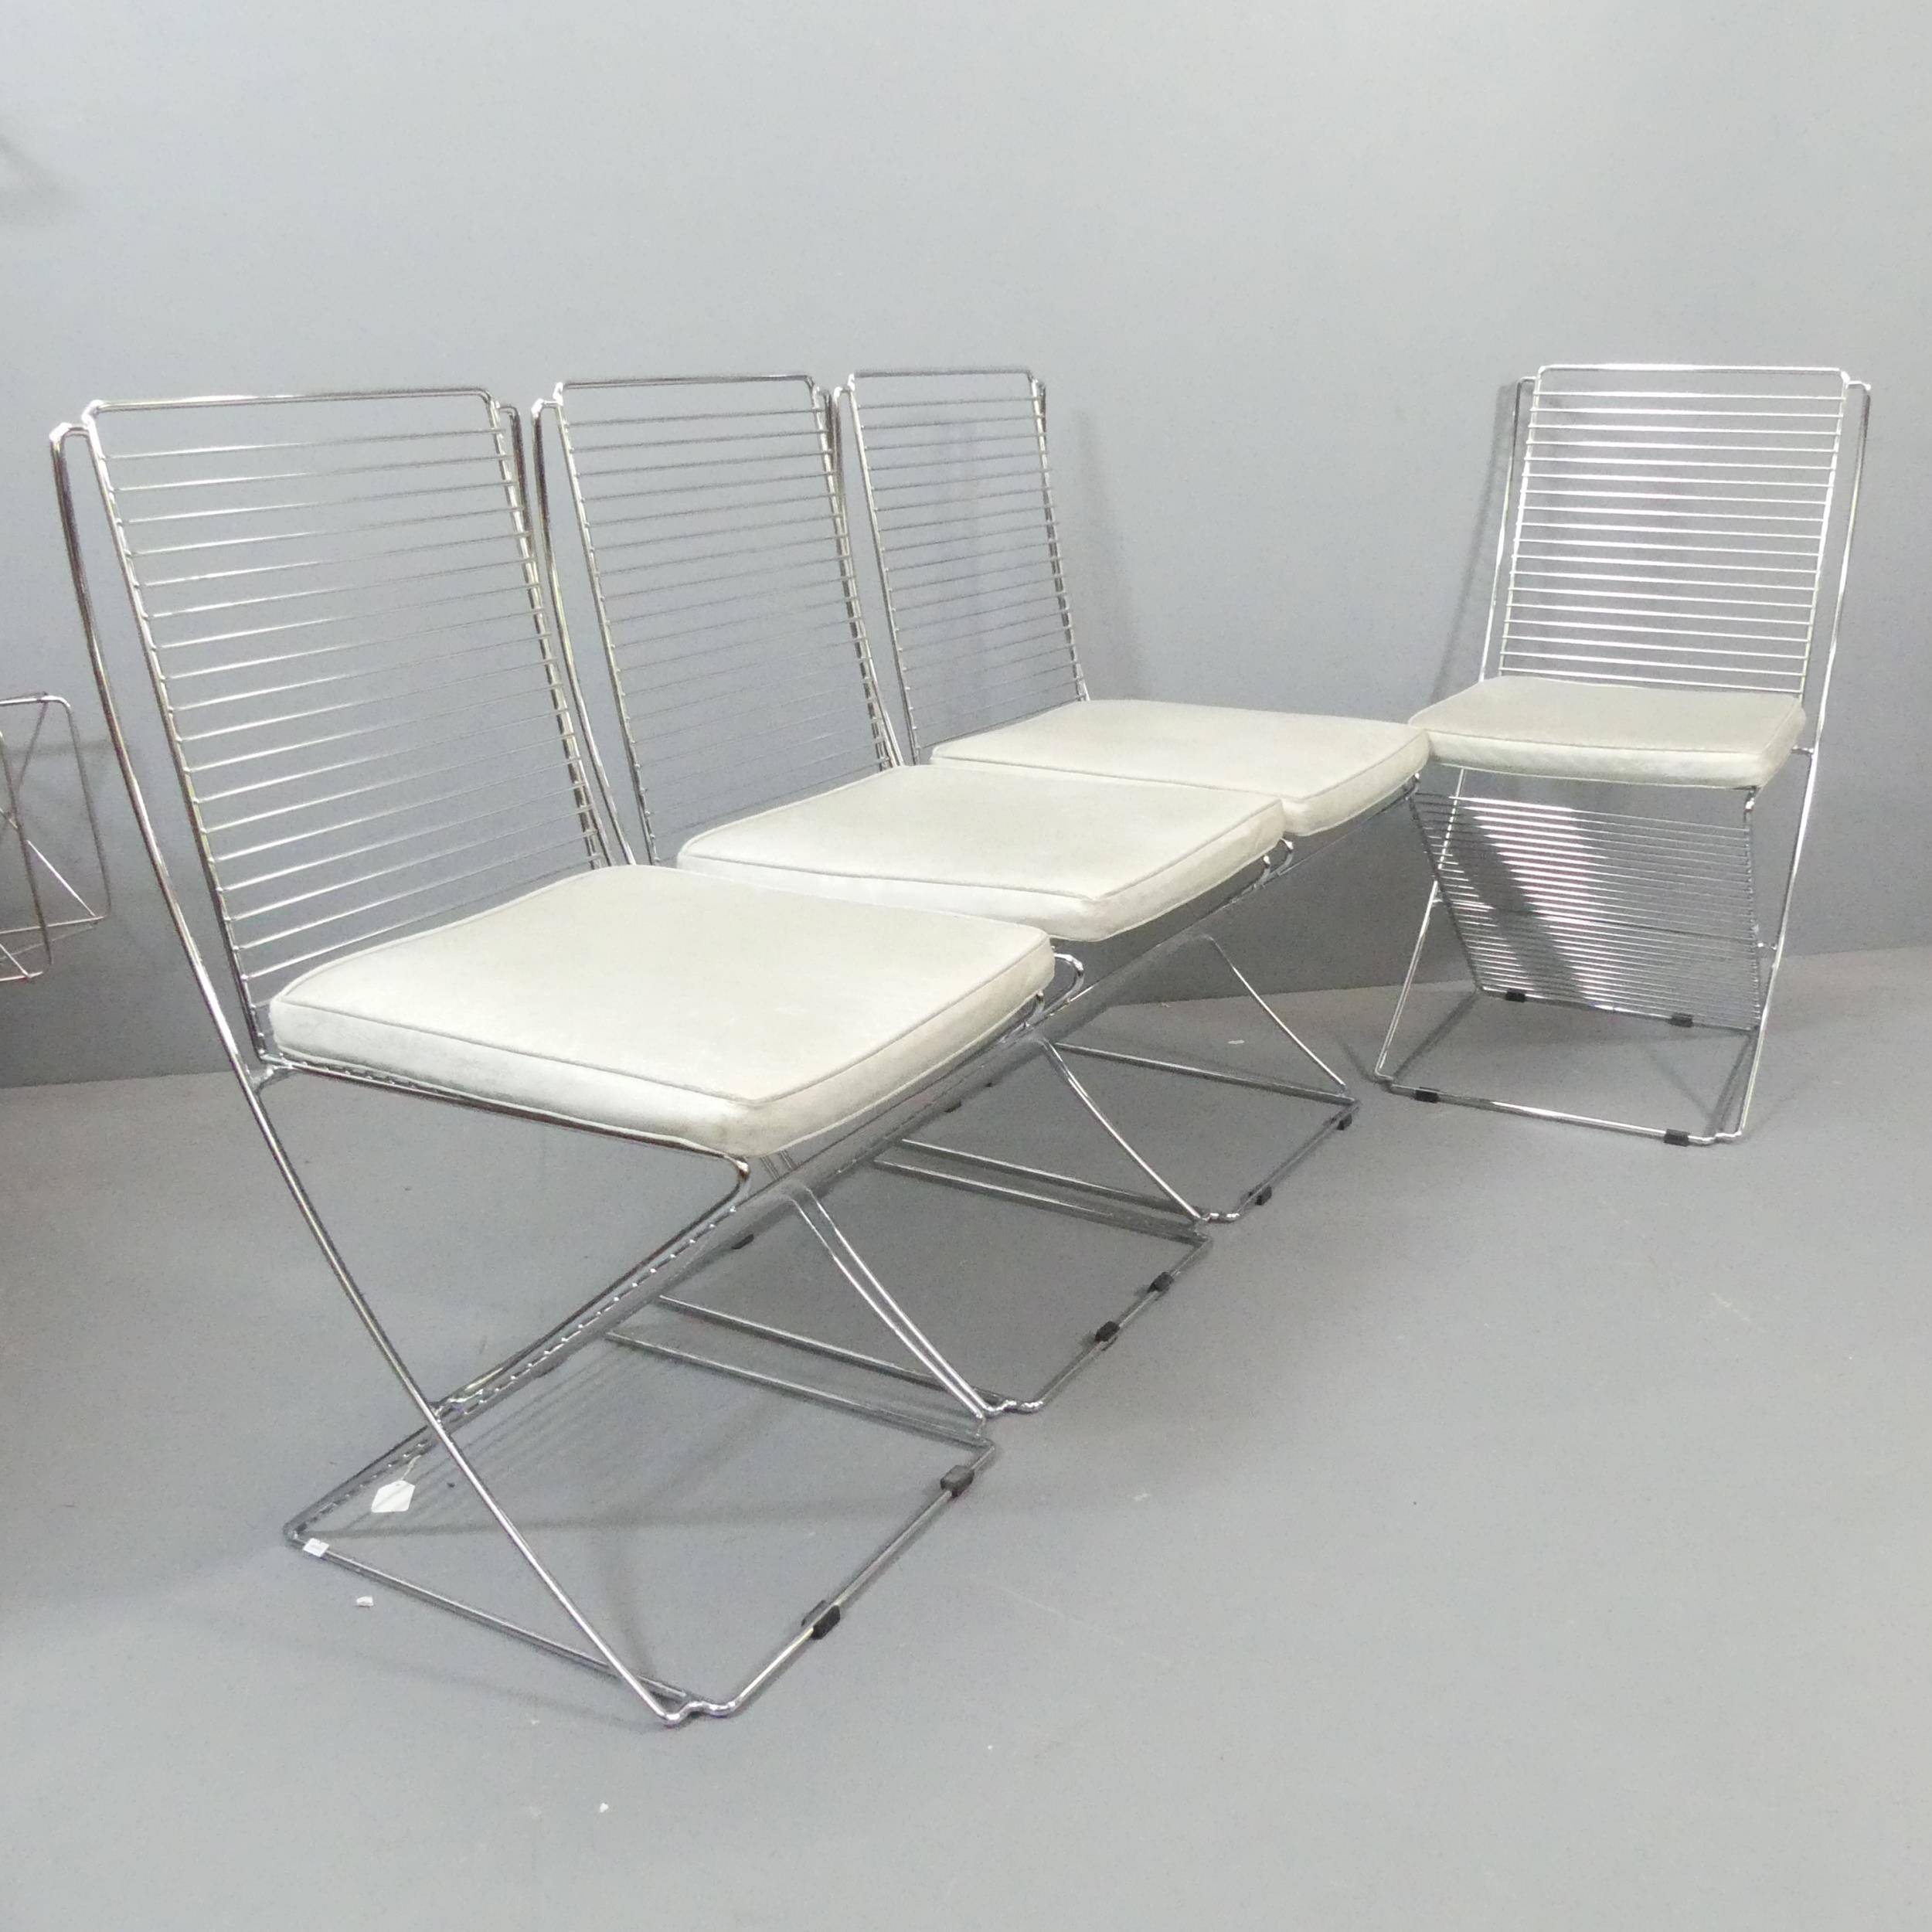 SHLUBACH - A set of 4 mid-century chrome wire chairs by Til Behrens.